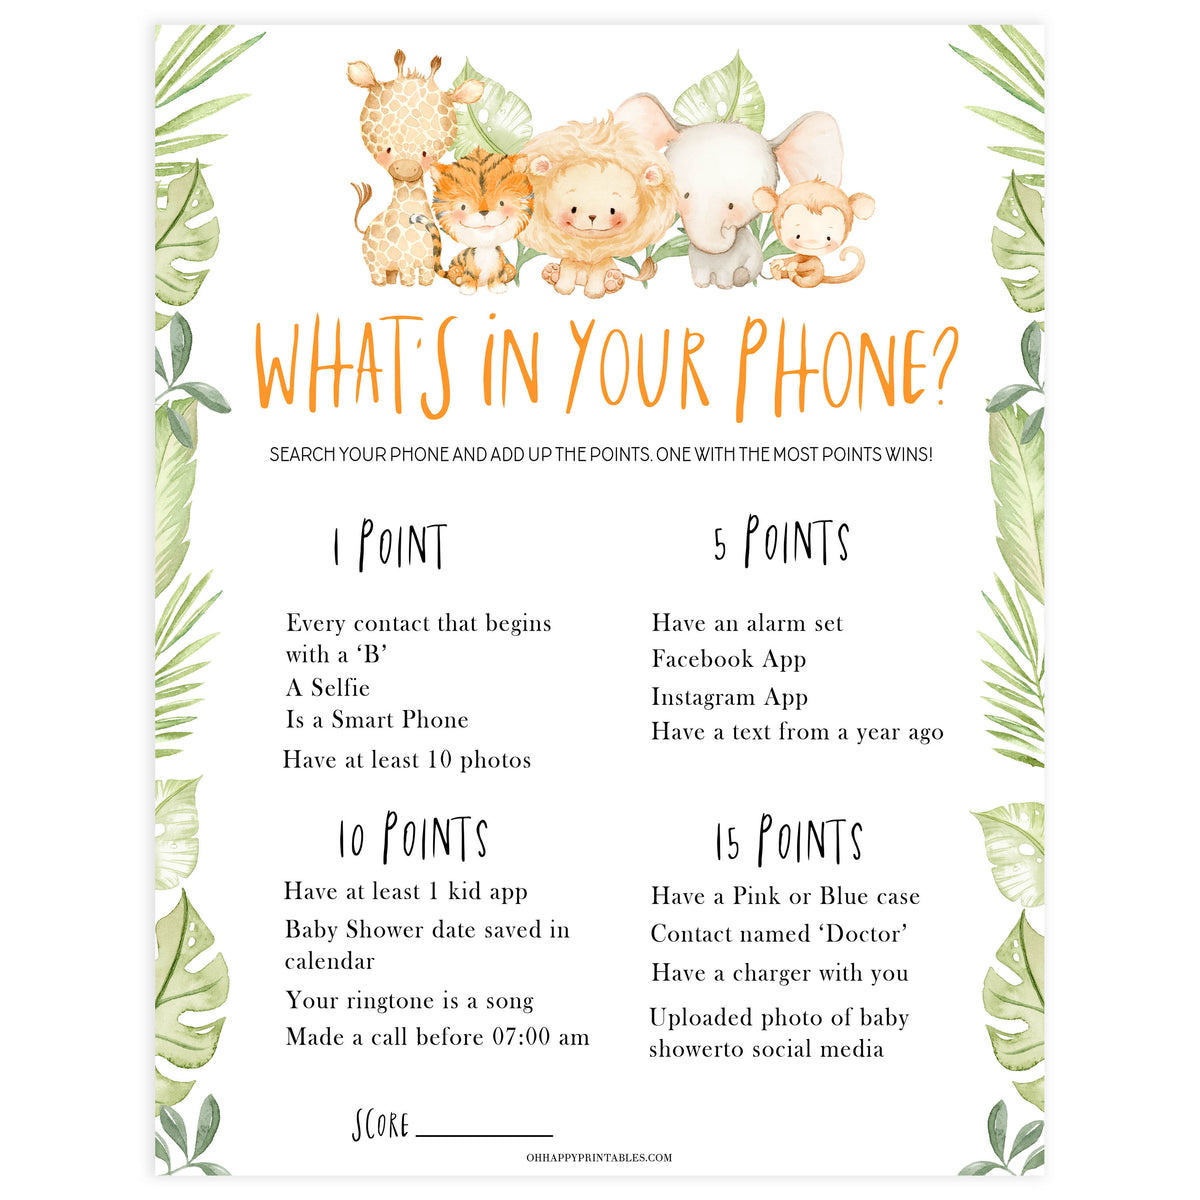 whats in your phone game, Printable baby shower games, safari animals baby games, baby shower games, fun baby shower ideas, top baby shower ideas, safari animals baby shower, baby shower games, fun baby shower ideas